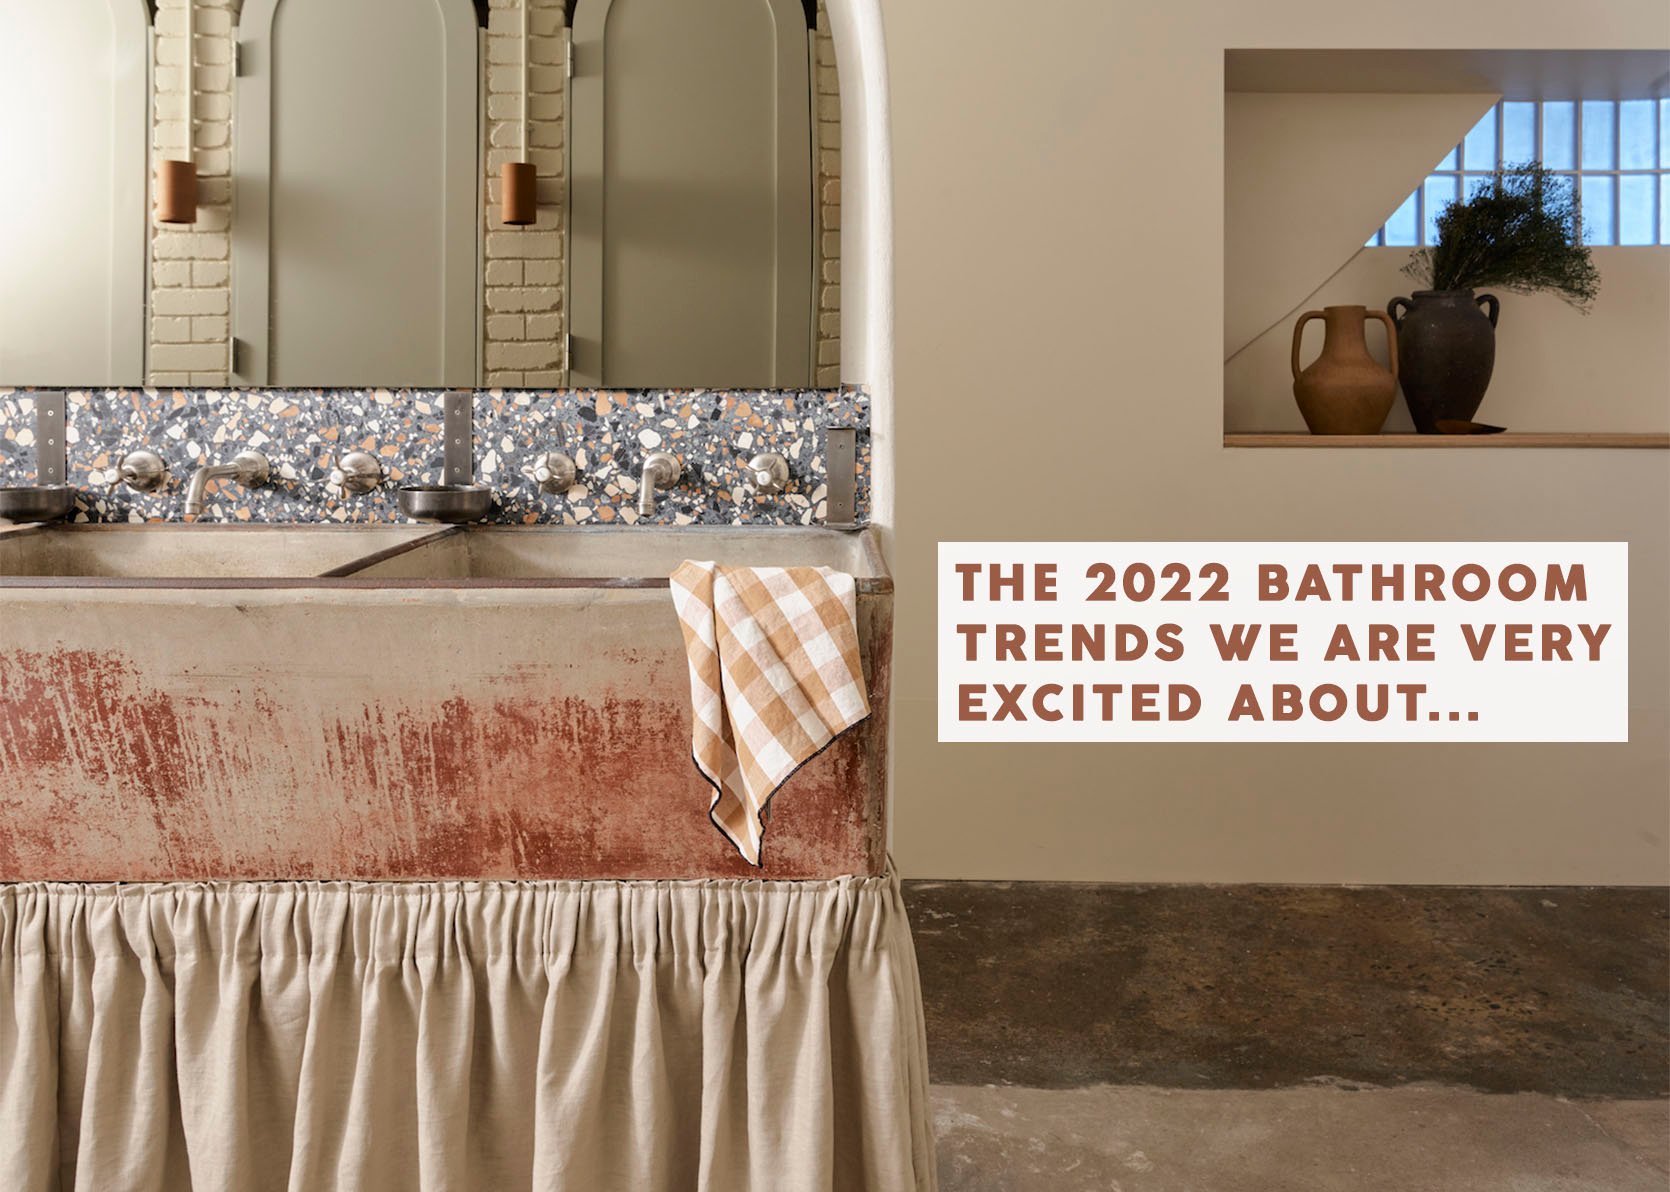 The 2022 Bathroom Trends That Renovators Won’t Want To Miss